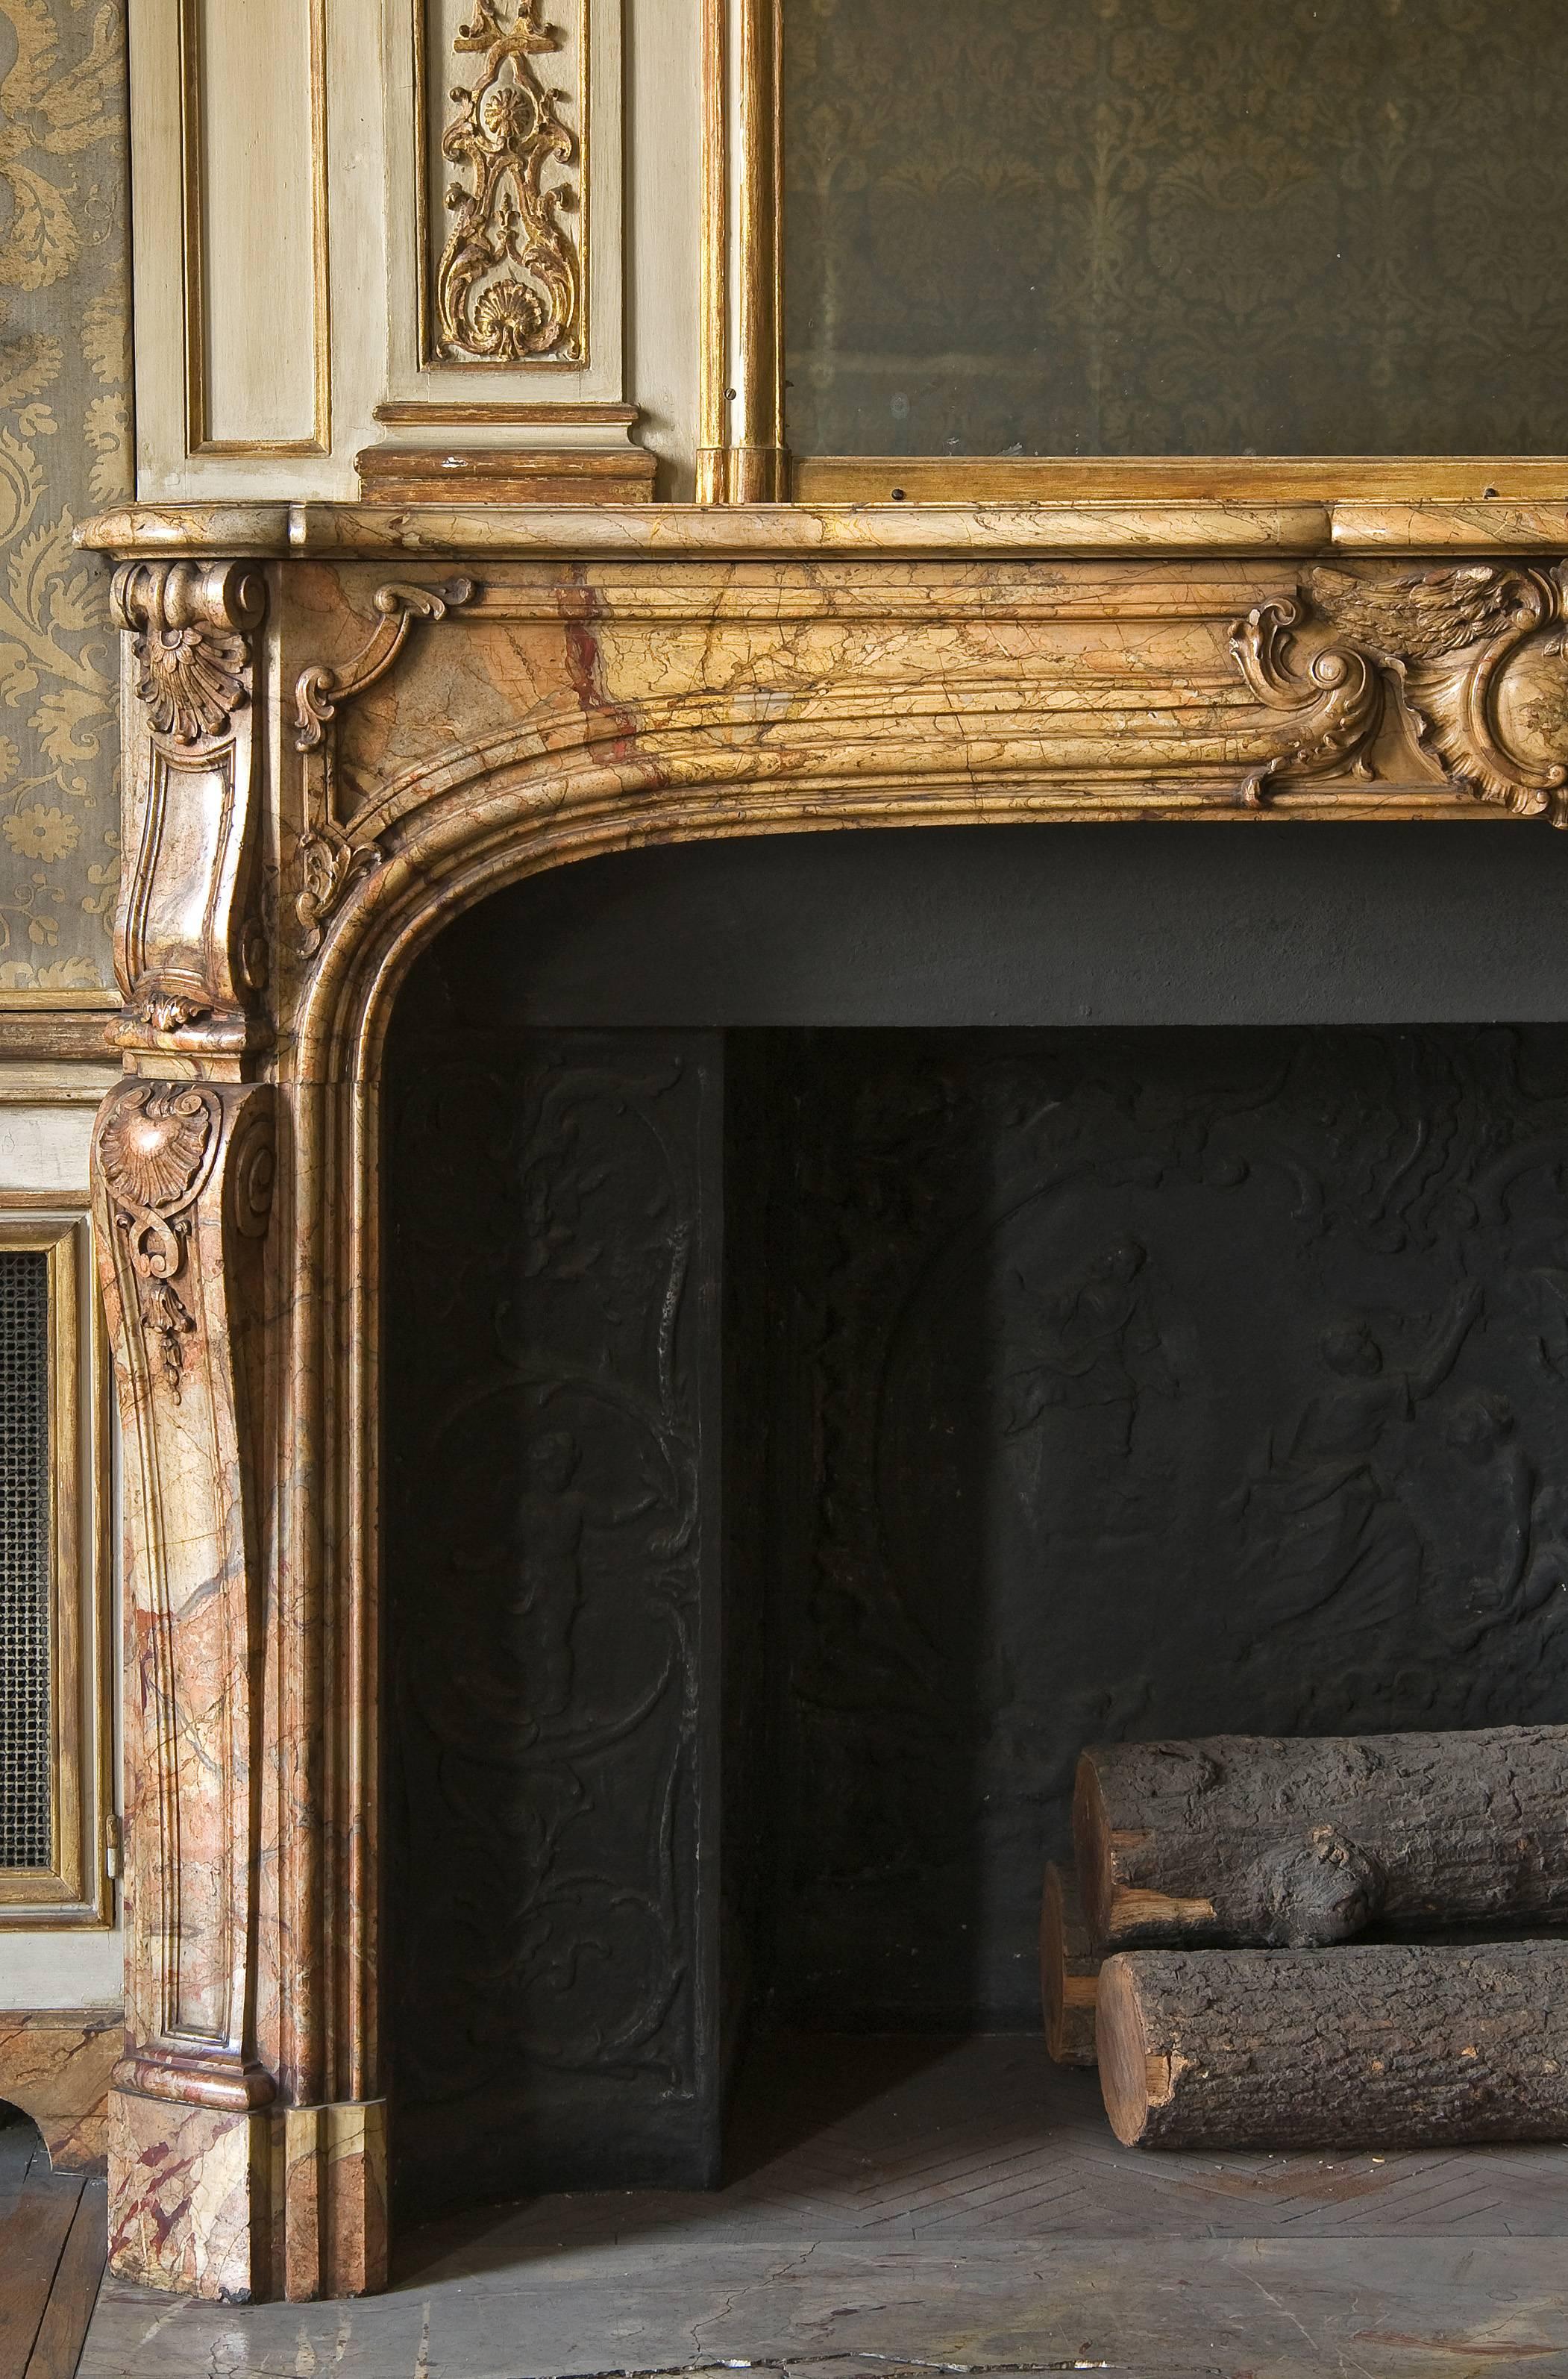 This fireplace is in Saracolin, the marble is carved on the shelve and jambs.
The firplace is sold with its irons.
Origin: Lesieur Collection, Paris avenue Foch.
 